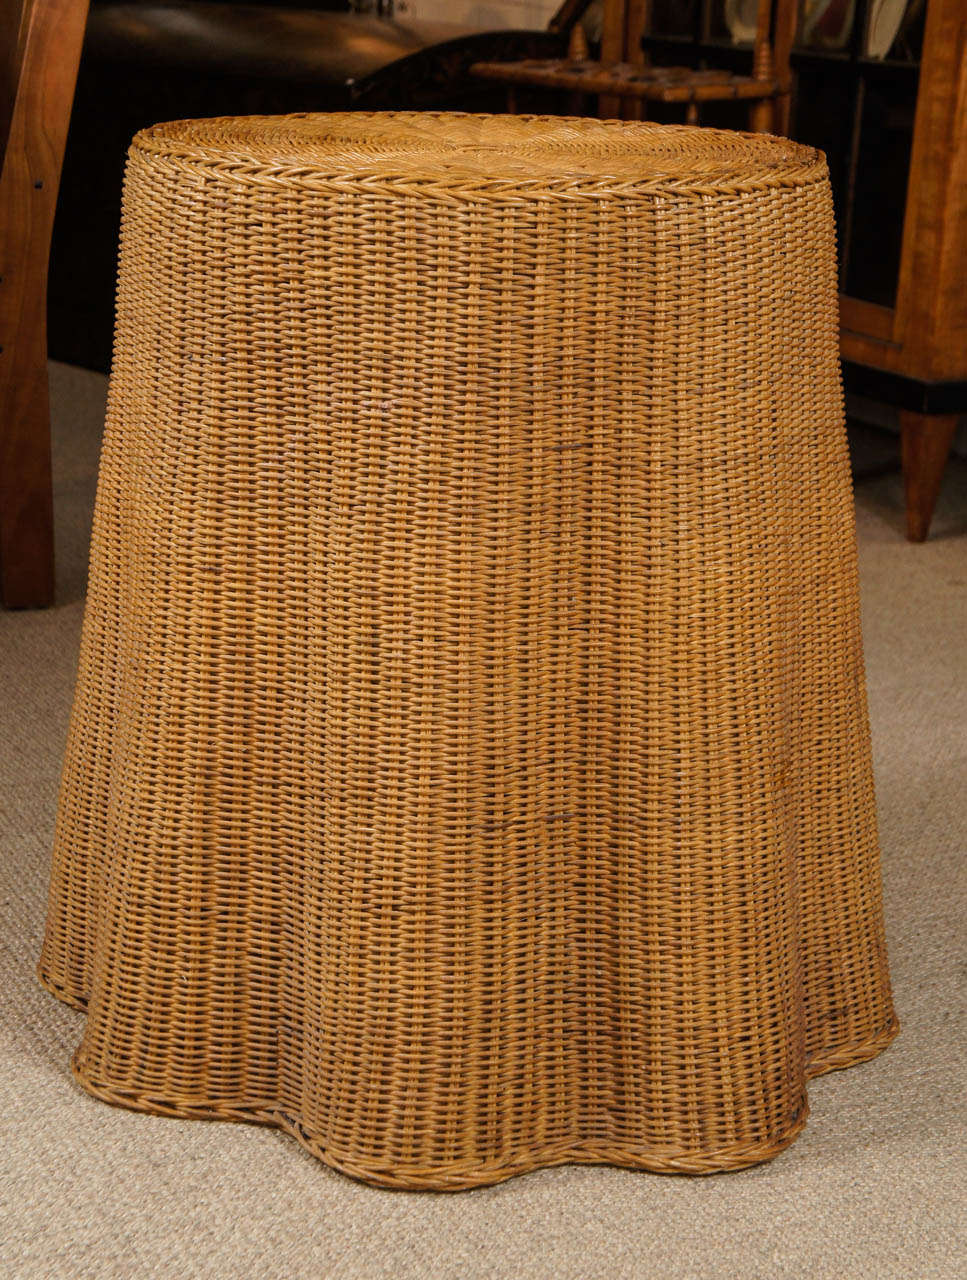 Here is a charming draped wicker side table.